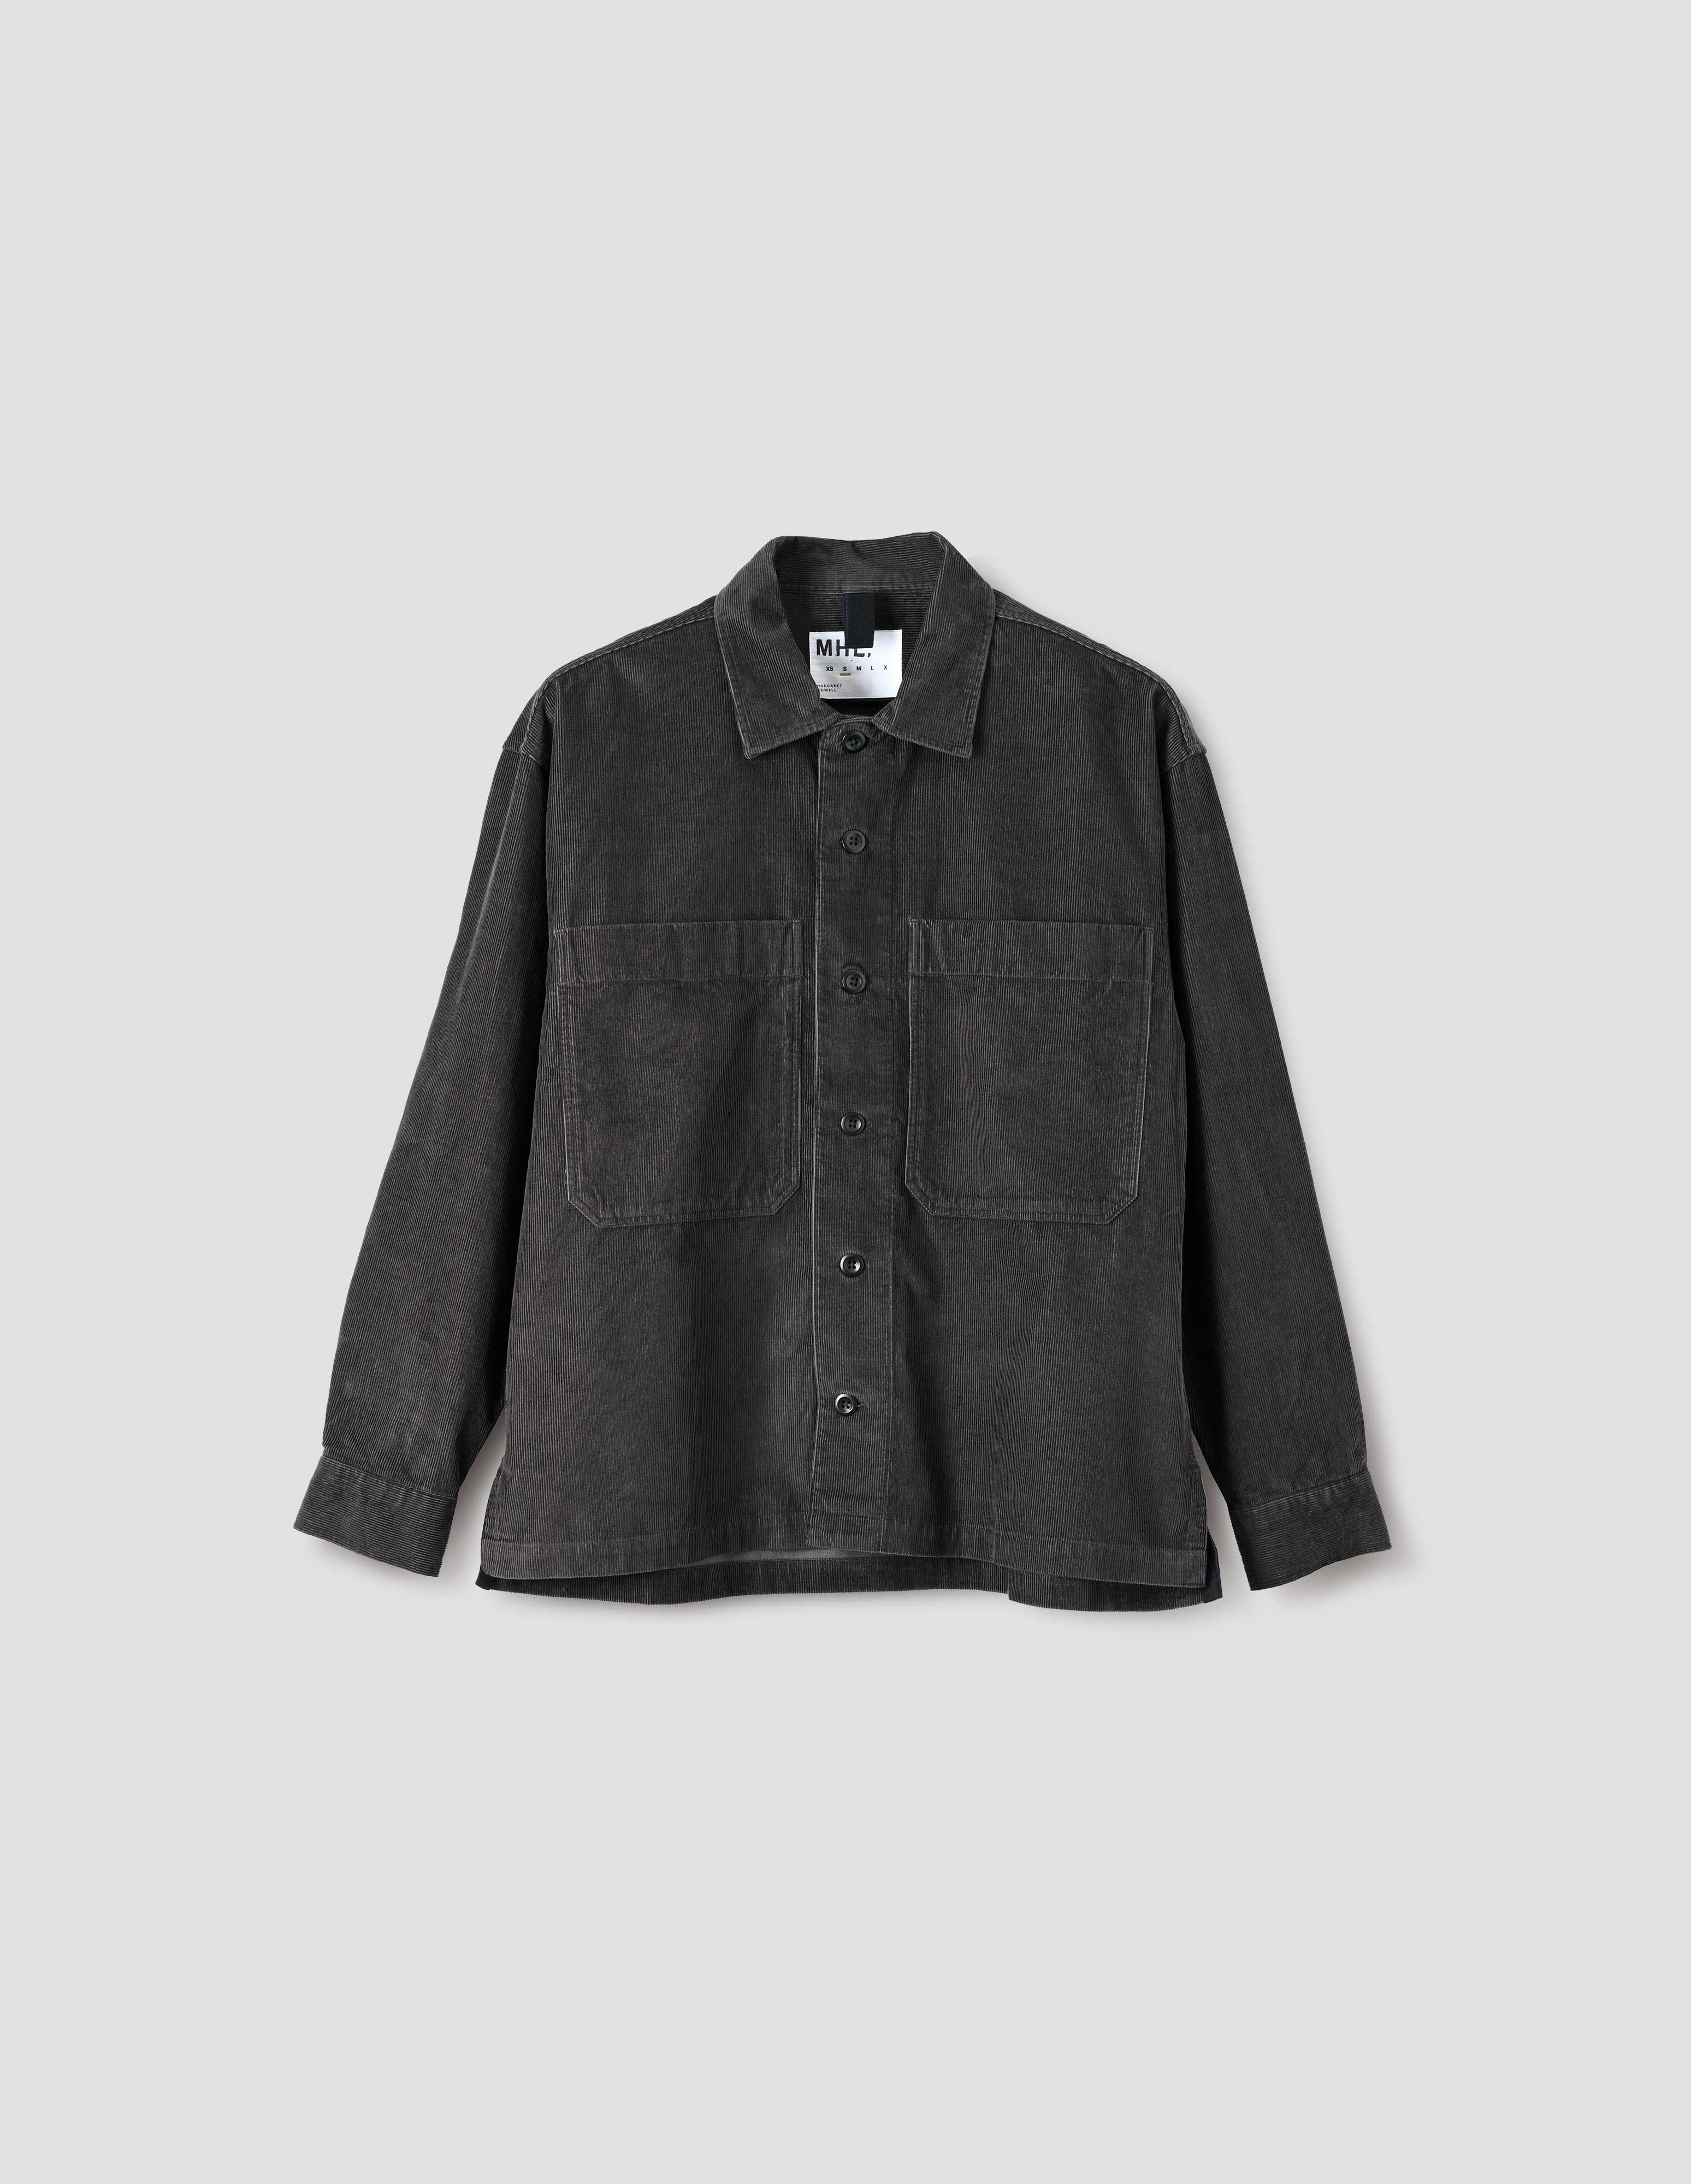 MARGARET HOWELL - Lead dry cotton needlecord shirt | MHL. by Margaret ...